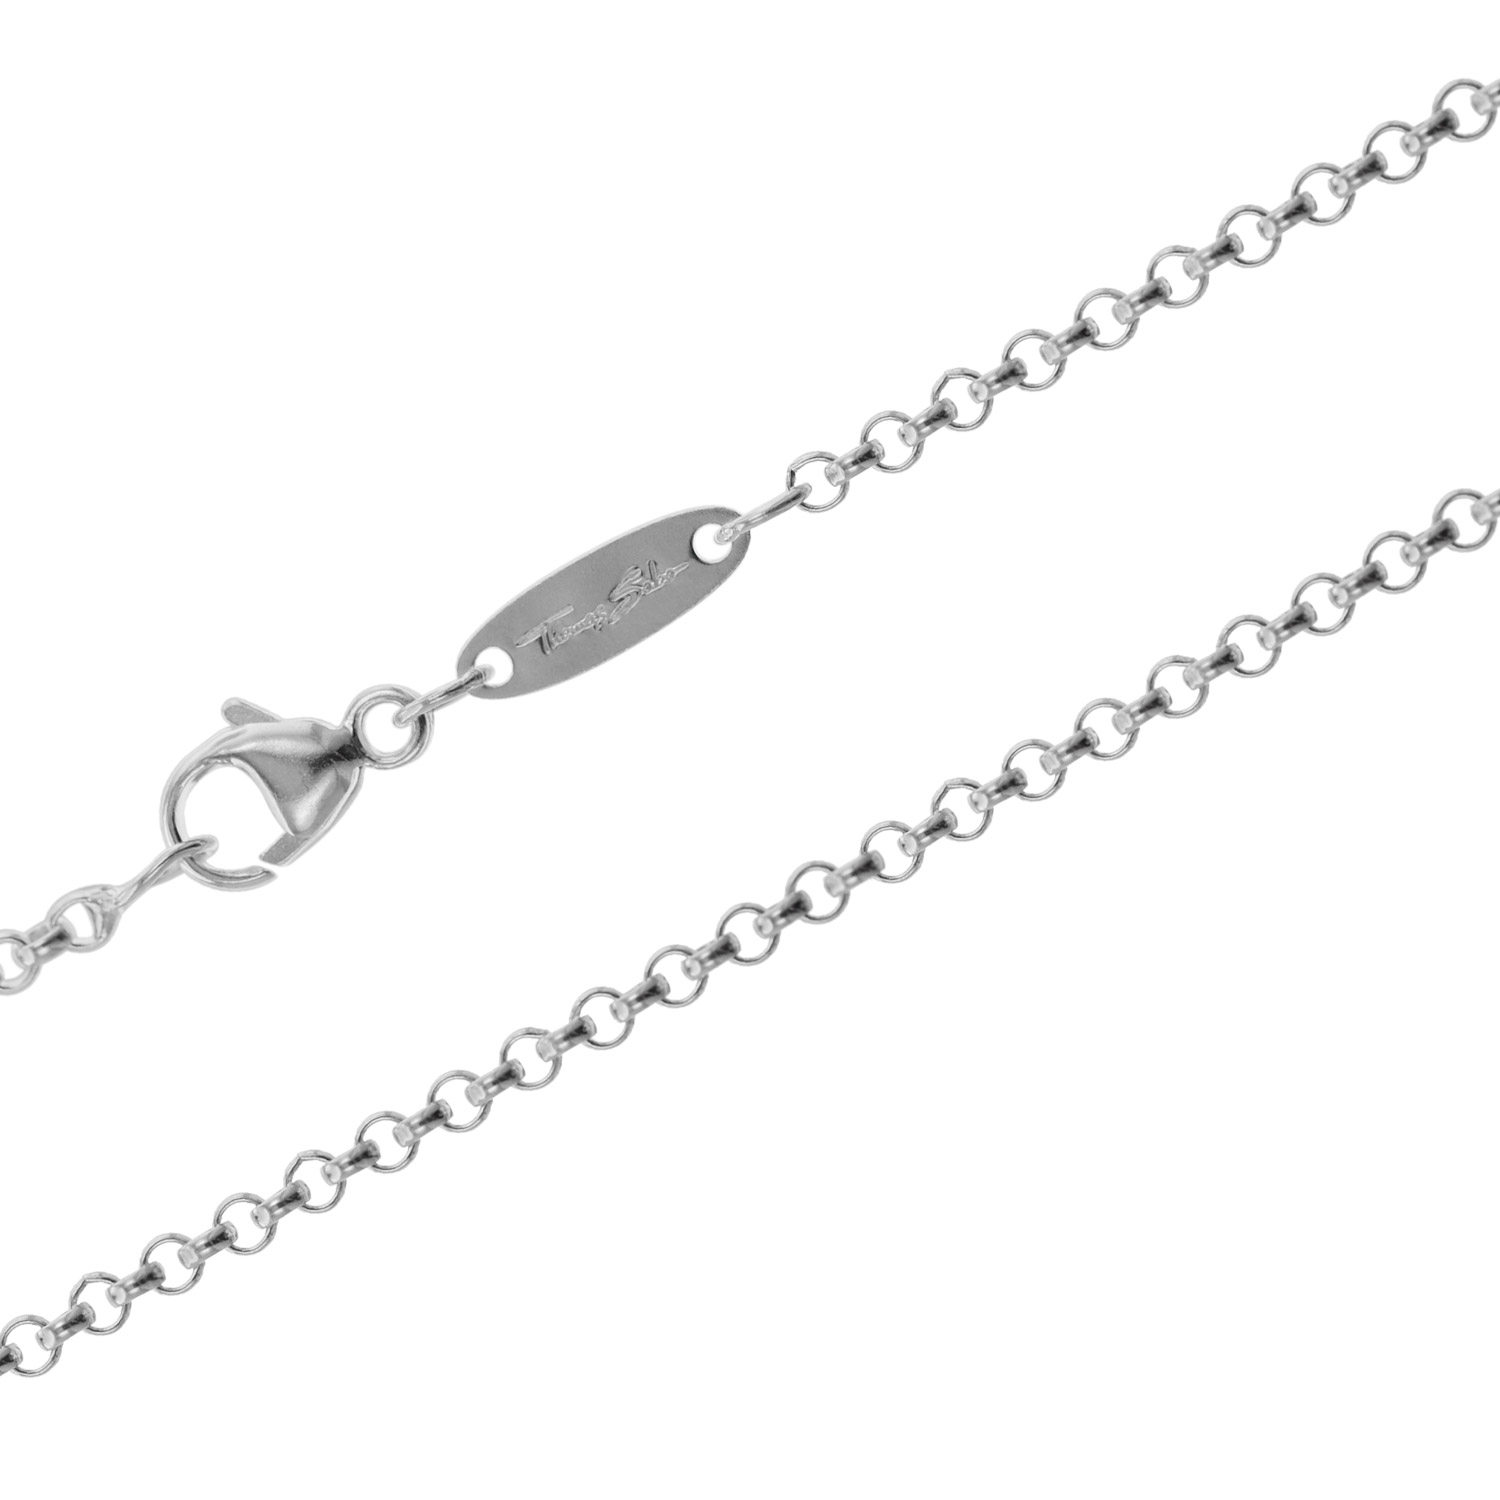 Thomas Sabo Ladies Necklace for Charms X0001-001-12 • uhrcenter